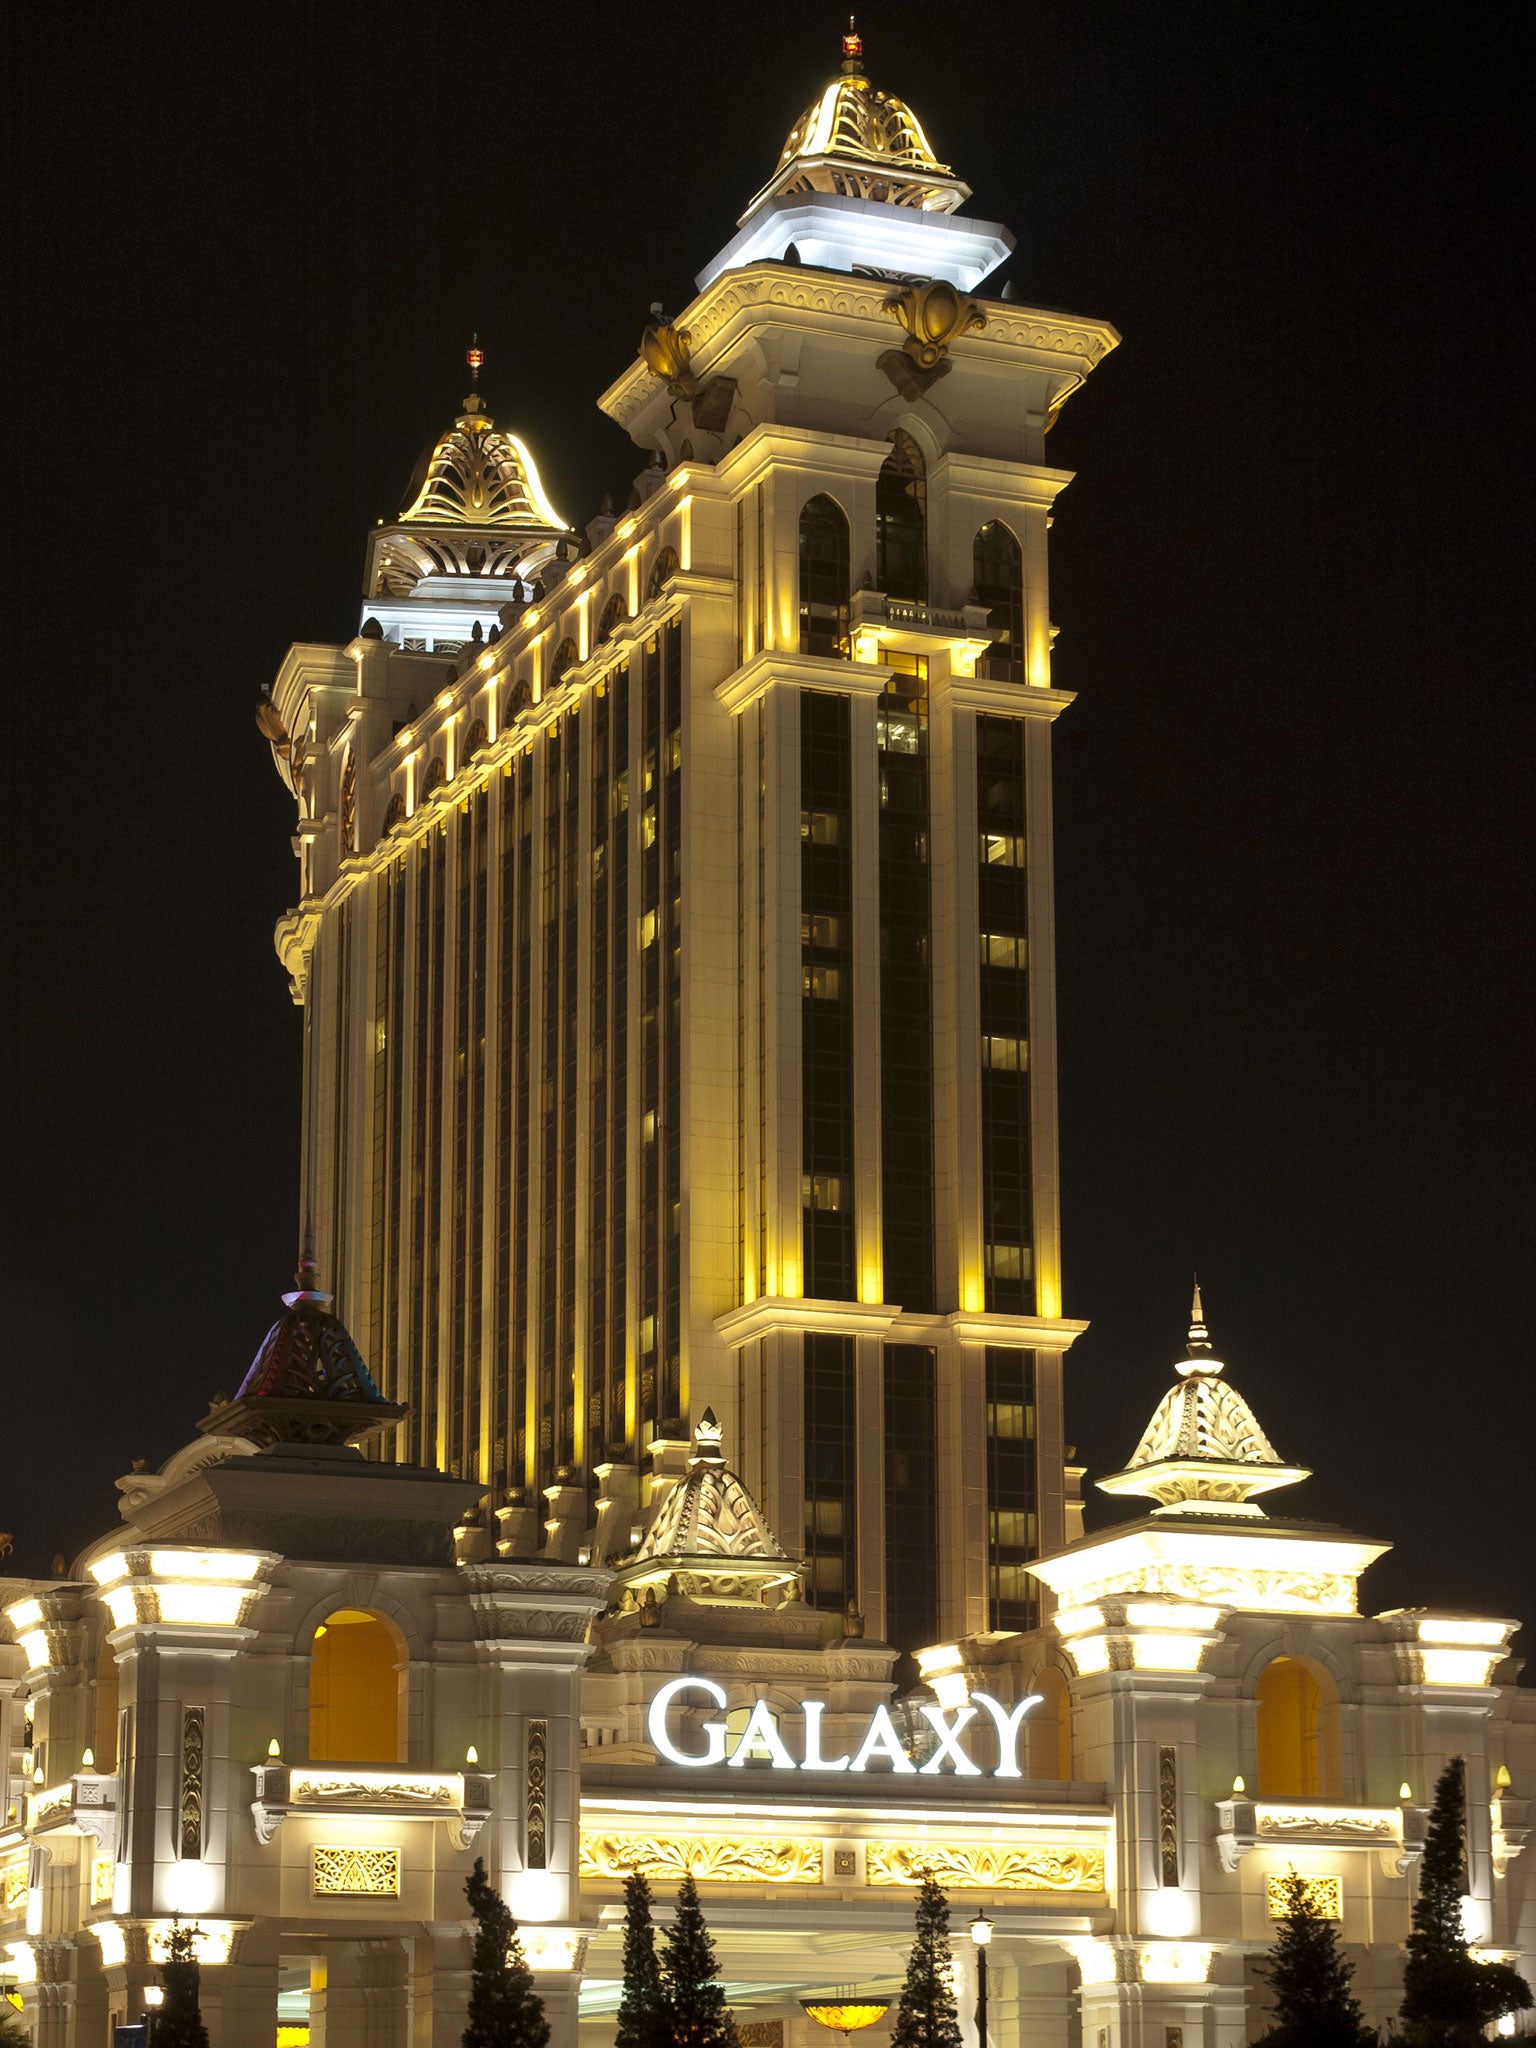 Sky 32 sits on the 32nd floor of the Galaxy casino in Macau